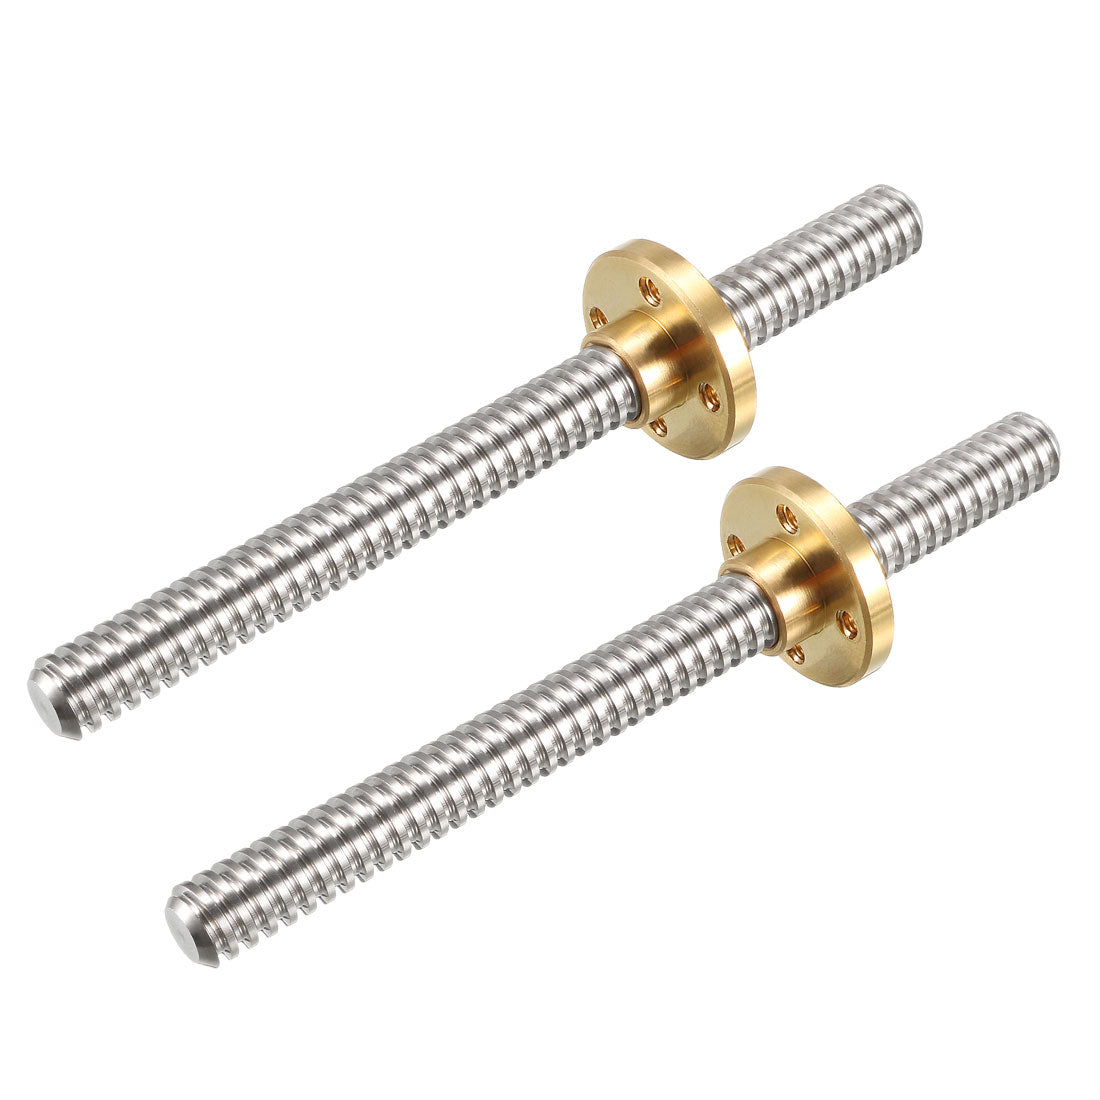 uxcell Uxcell 2PCS 100mm T8 Pitch 2mm Lead 2mm Lead Screw Rod with Copper Nut for 3D Printer